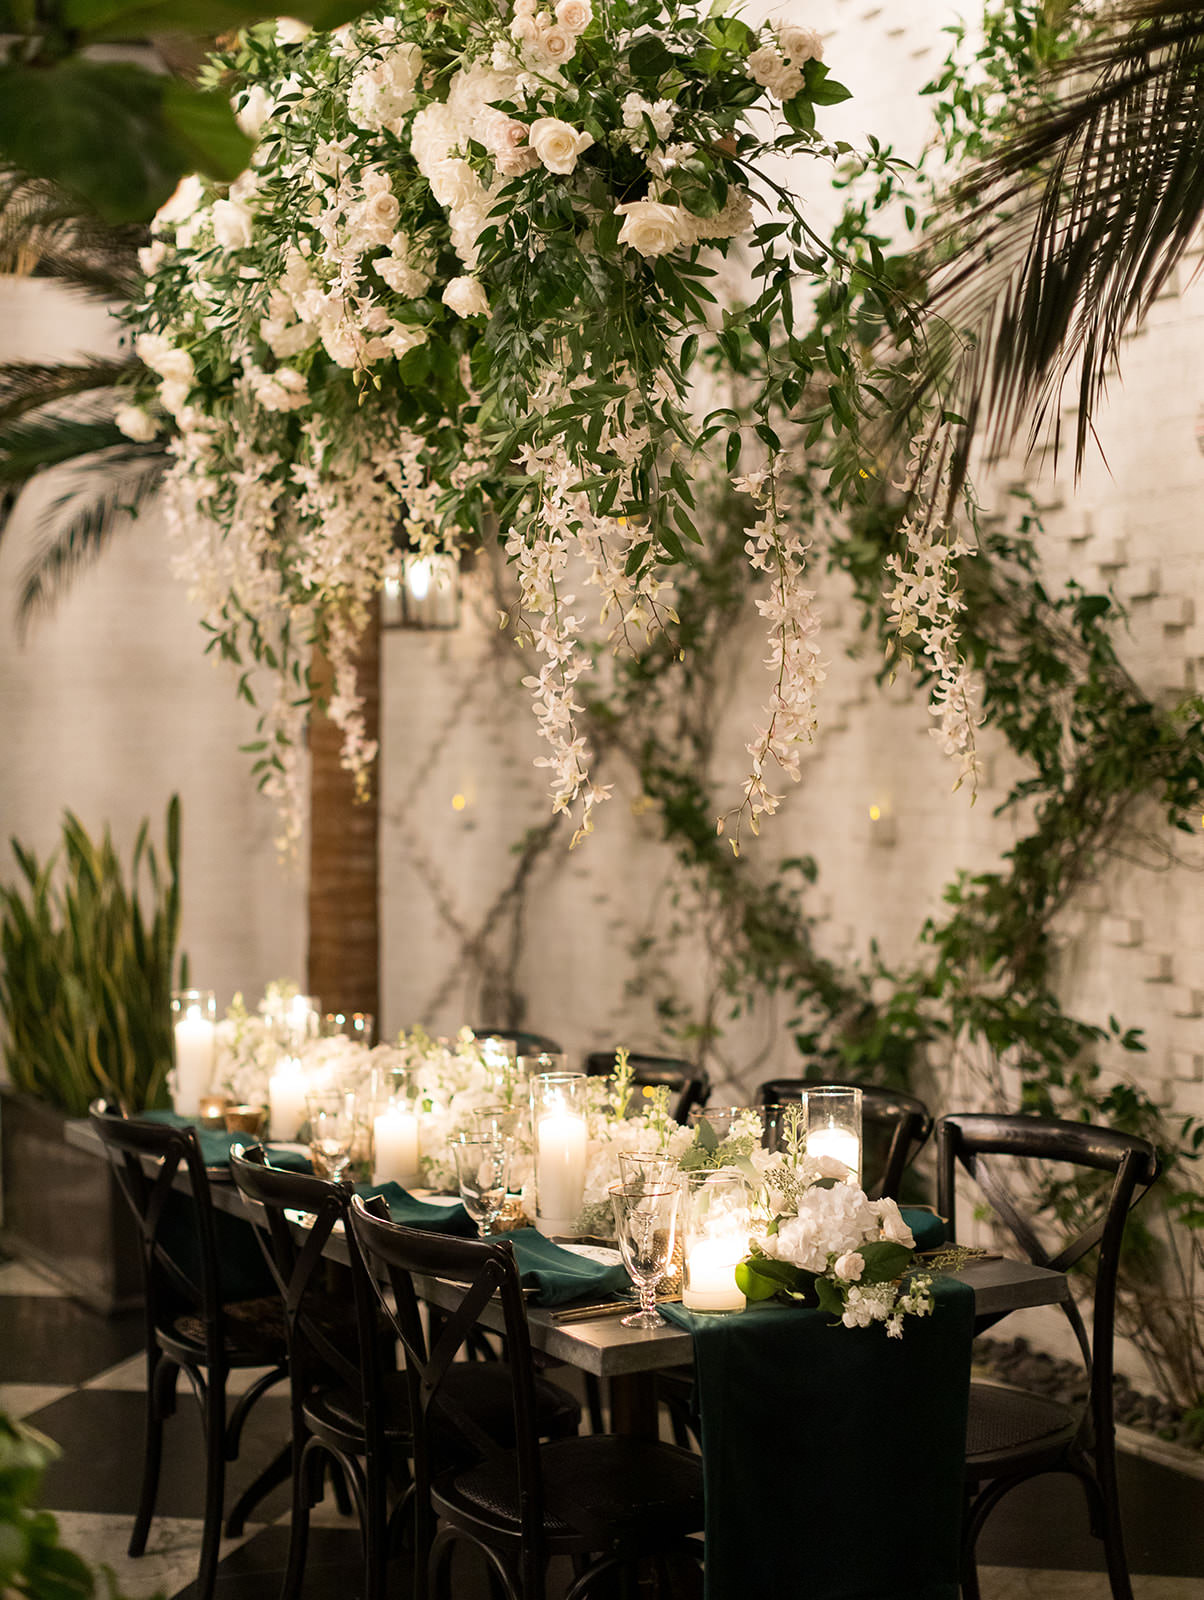 Classic Wedding Reception Decor, Long Tables with Green Linen Table Runners, Candles, Low White Floral Centerpieces, Wooden Cross Back Chairs | Tampa Bay Wedding Florist Botanica | Wedding Venue Oxford Exchange